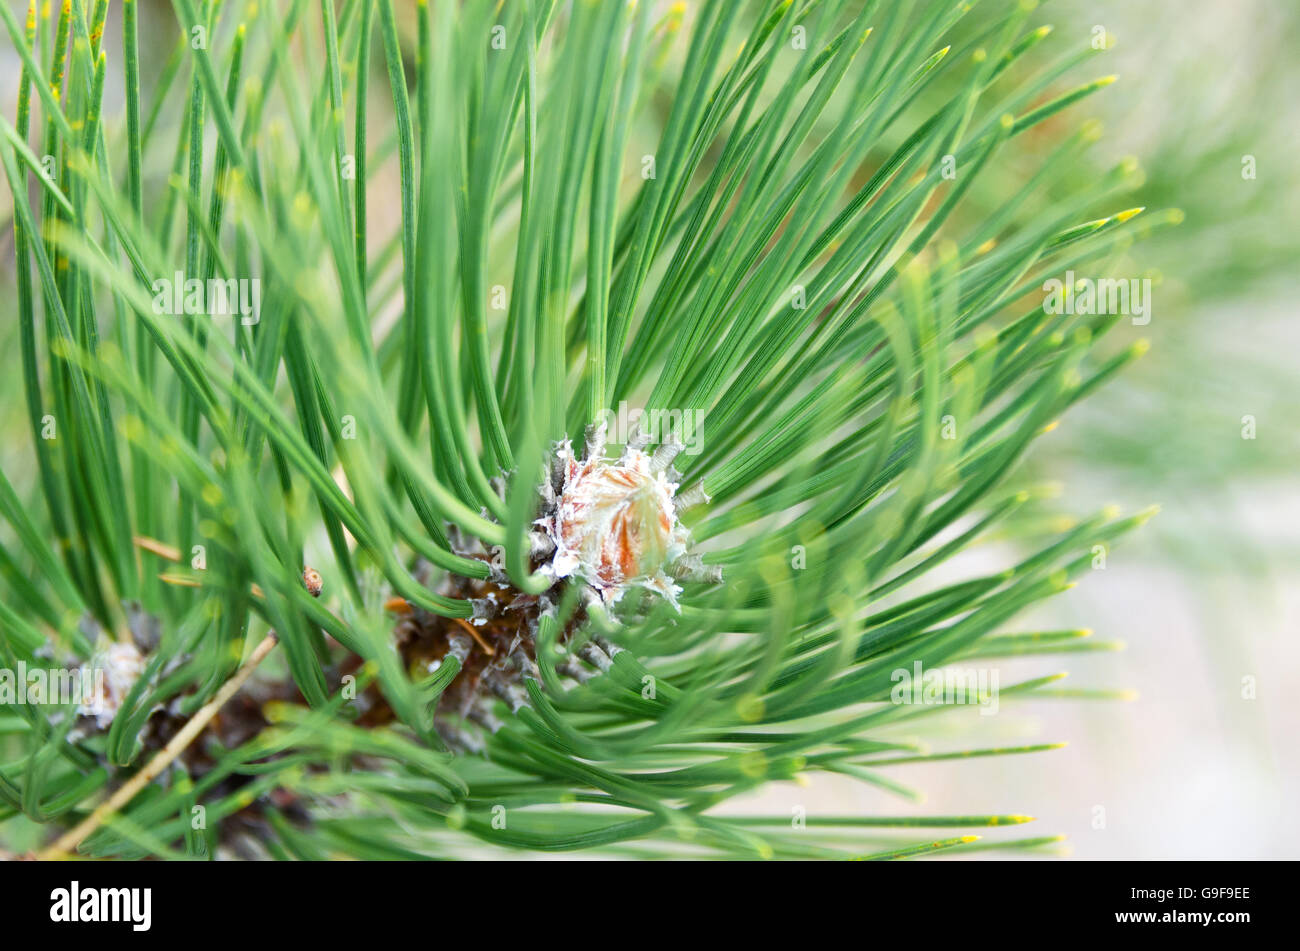 Branch tip of a Red Pine (Pinus resinosa) in December. Stock Photo